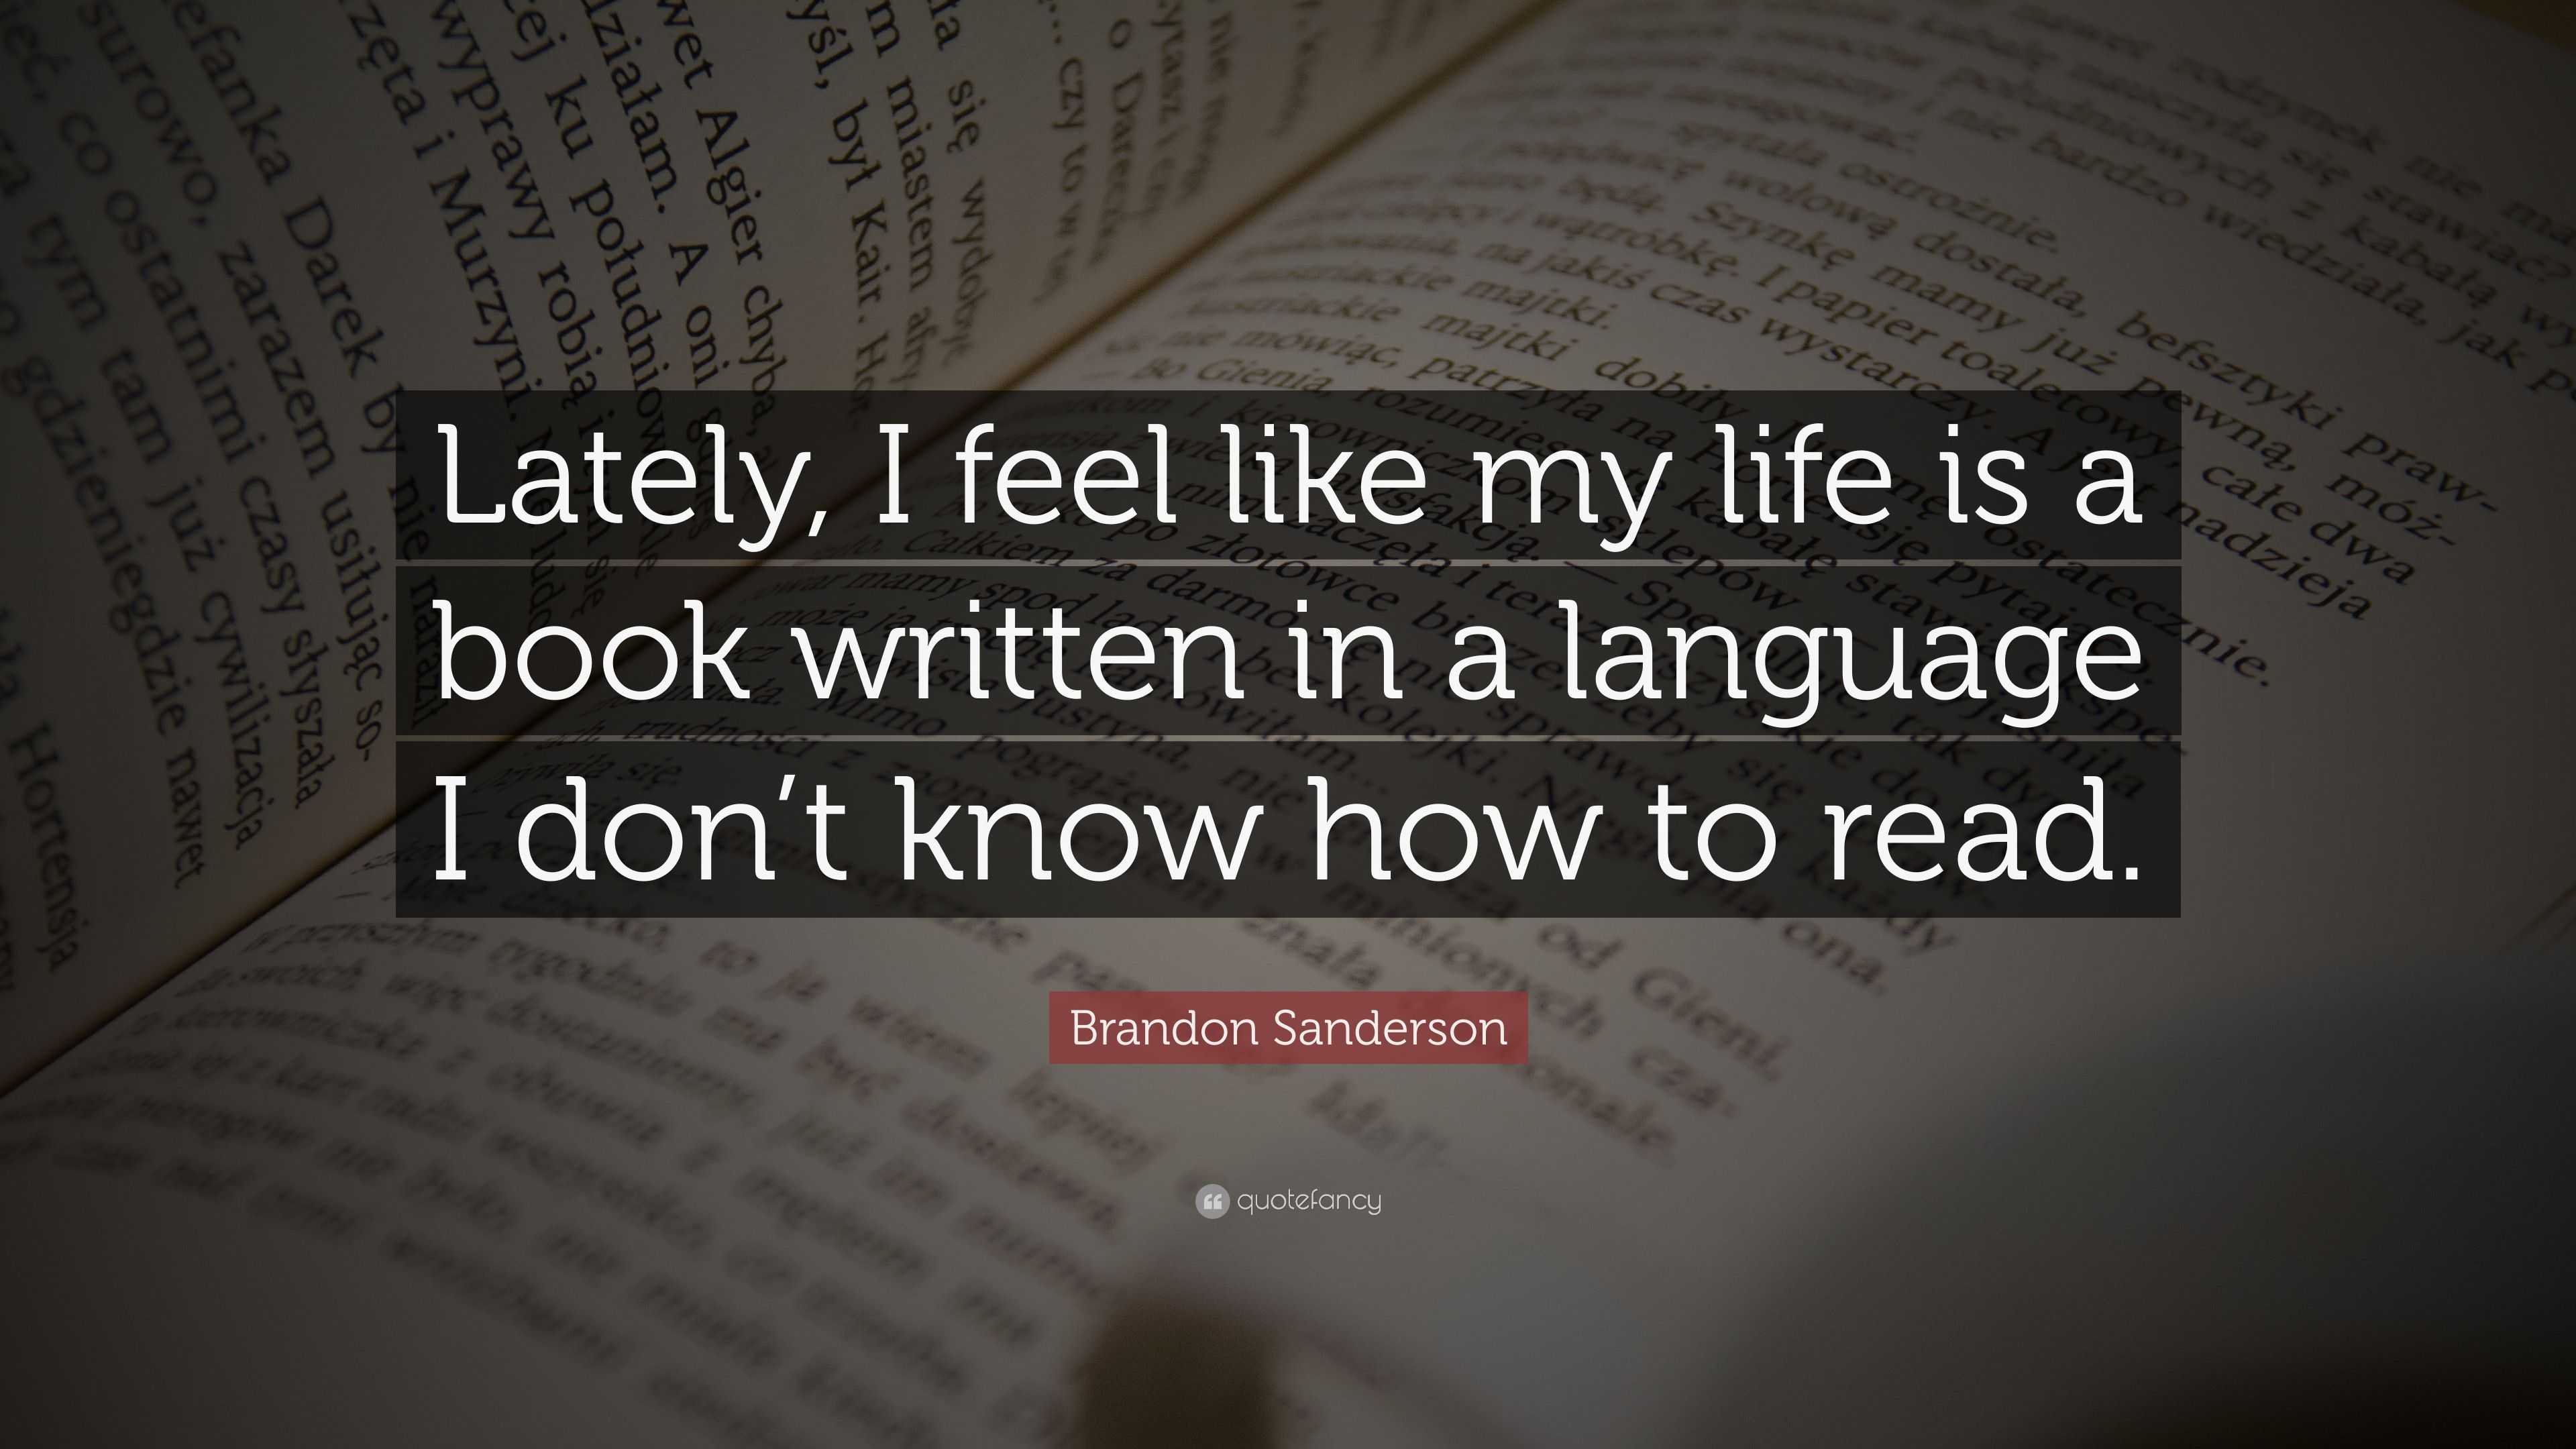 Brandon Sanderson Quote “Lately I feel like my life is a book written